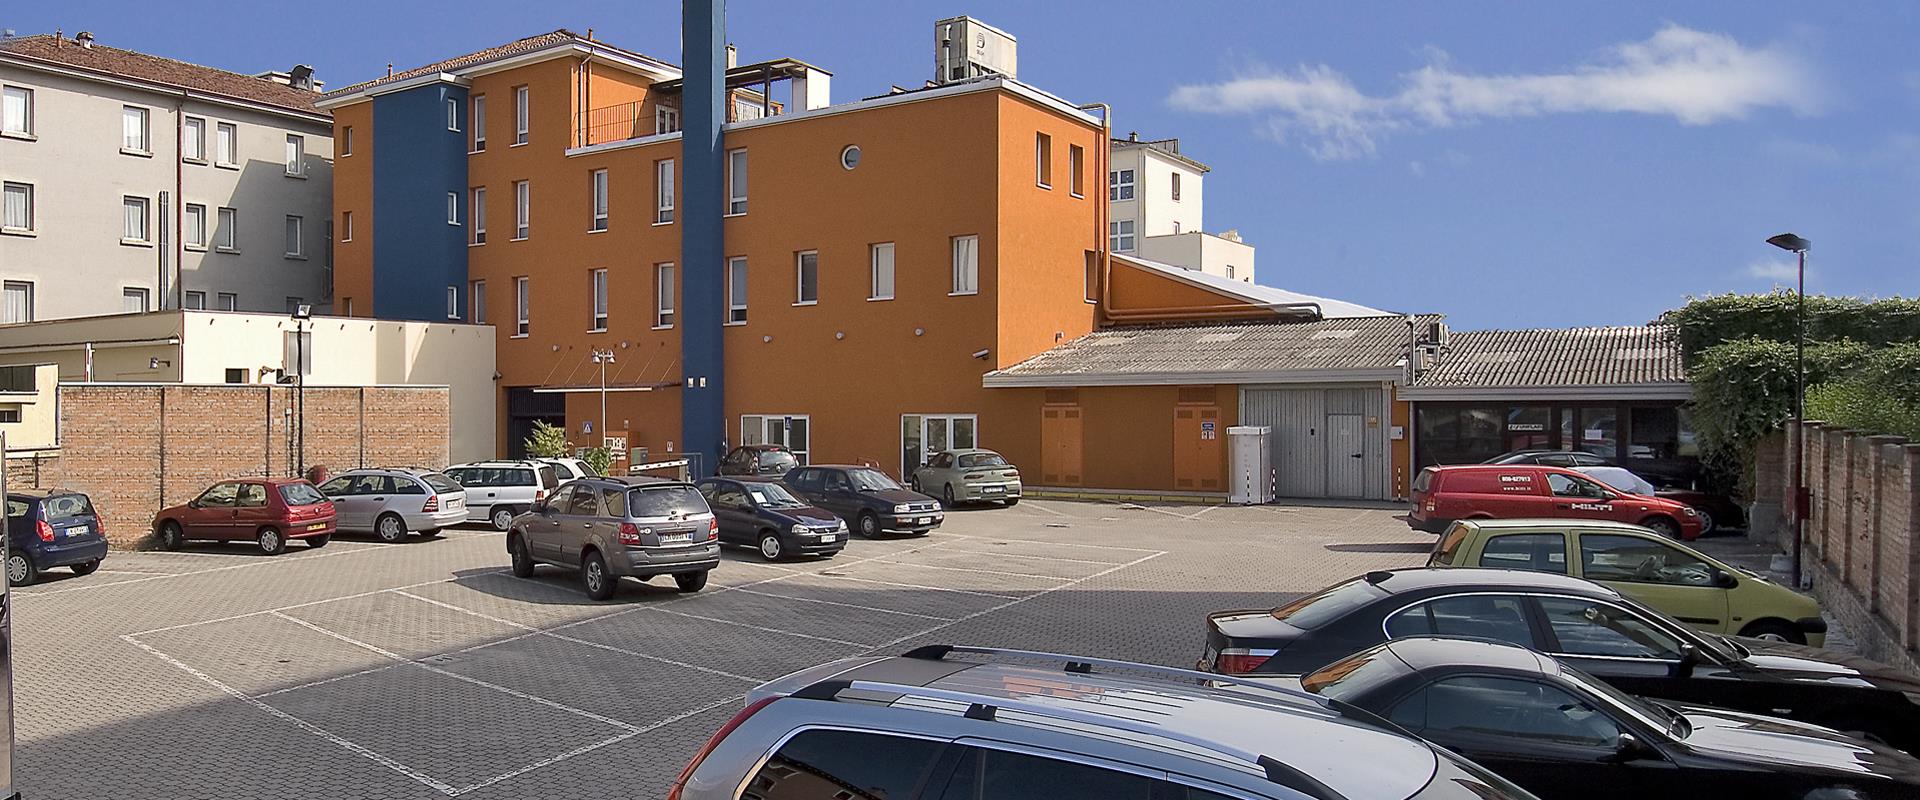 Forget the car and move to Venice in freedom! Parking at the Best Western Hotel Bologna in Mestre is under video surveillance.